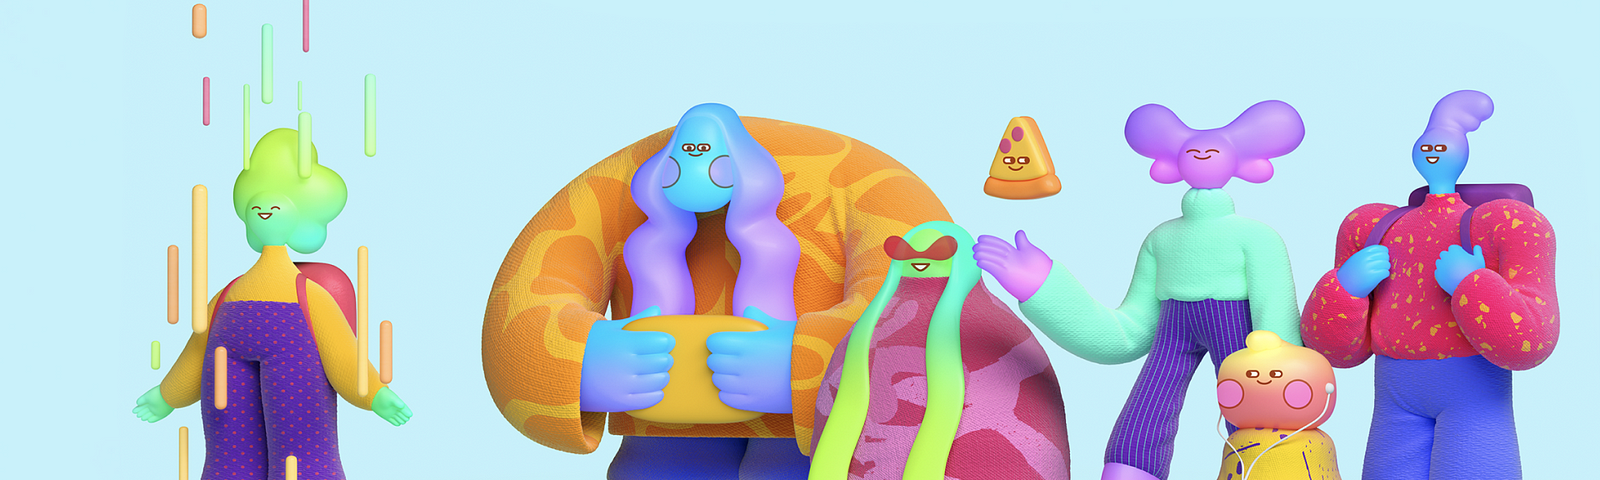 Cute 3D characters of different sizes, shapes, and color stand together.